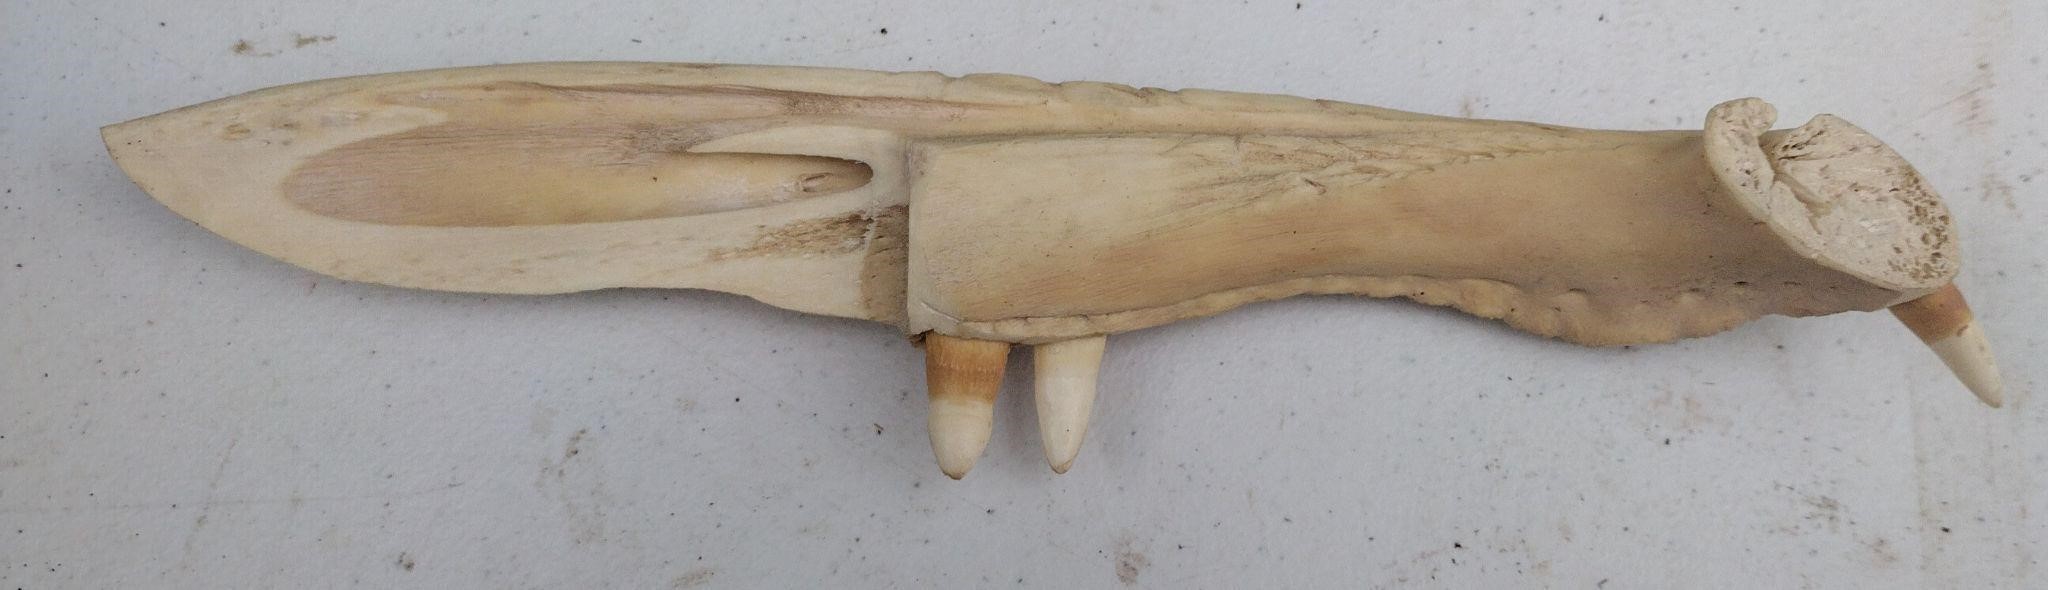 Hand Carved Knife from Jaw Bone of Animal!!